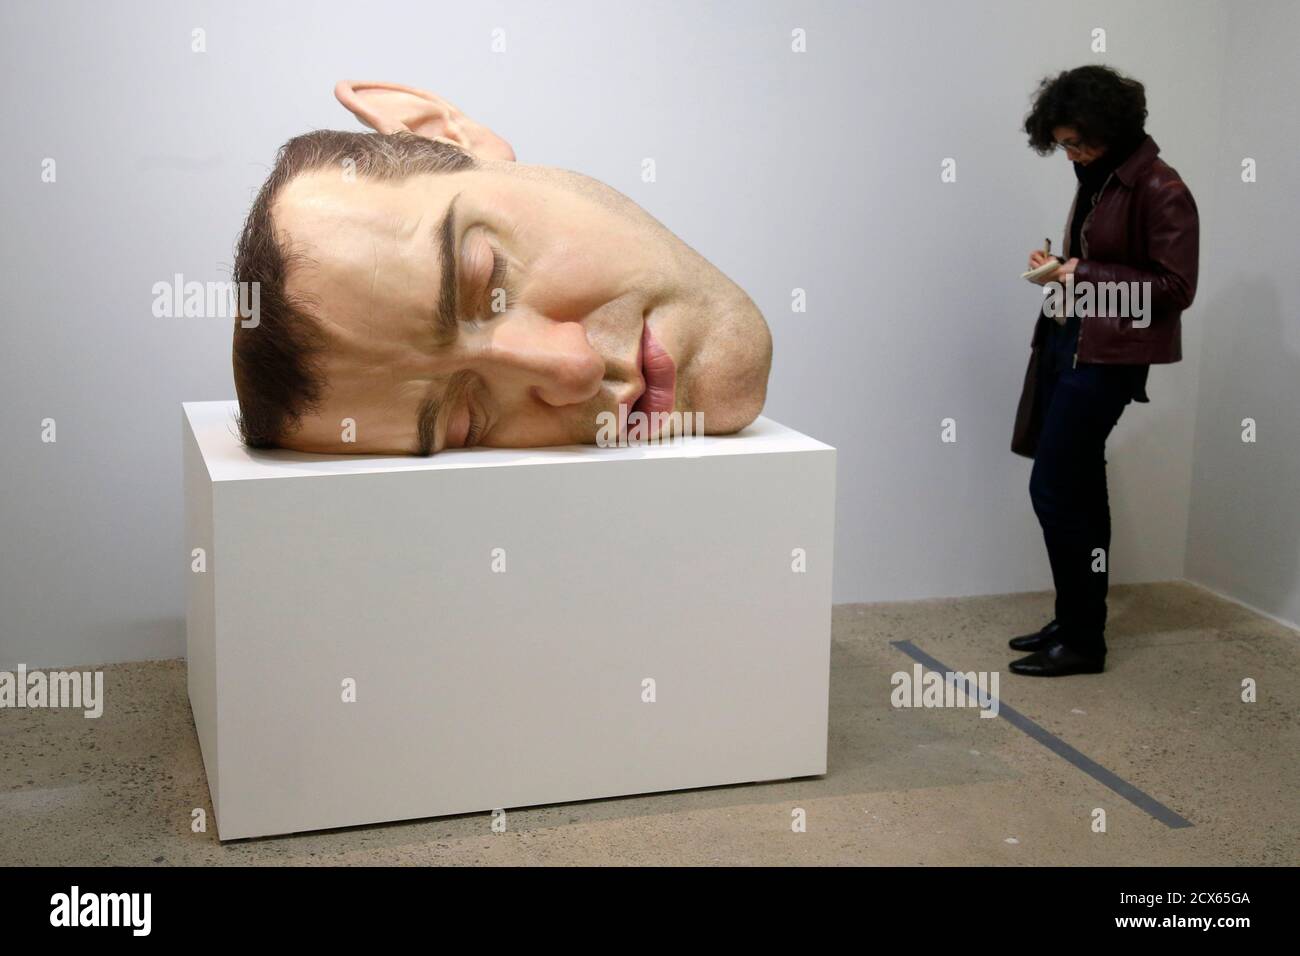 A visitor looks at a sculpture entitled "Mask II" (2002) by artist Ron Mueck during the press day his exhibition at the Fondation pour l'art contemporain in Paris April 15,